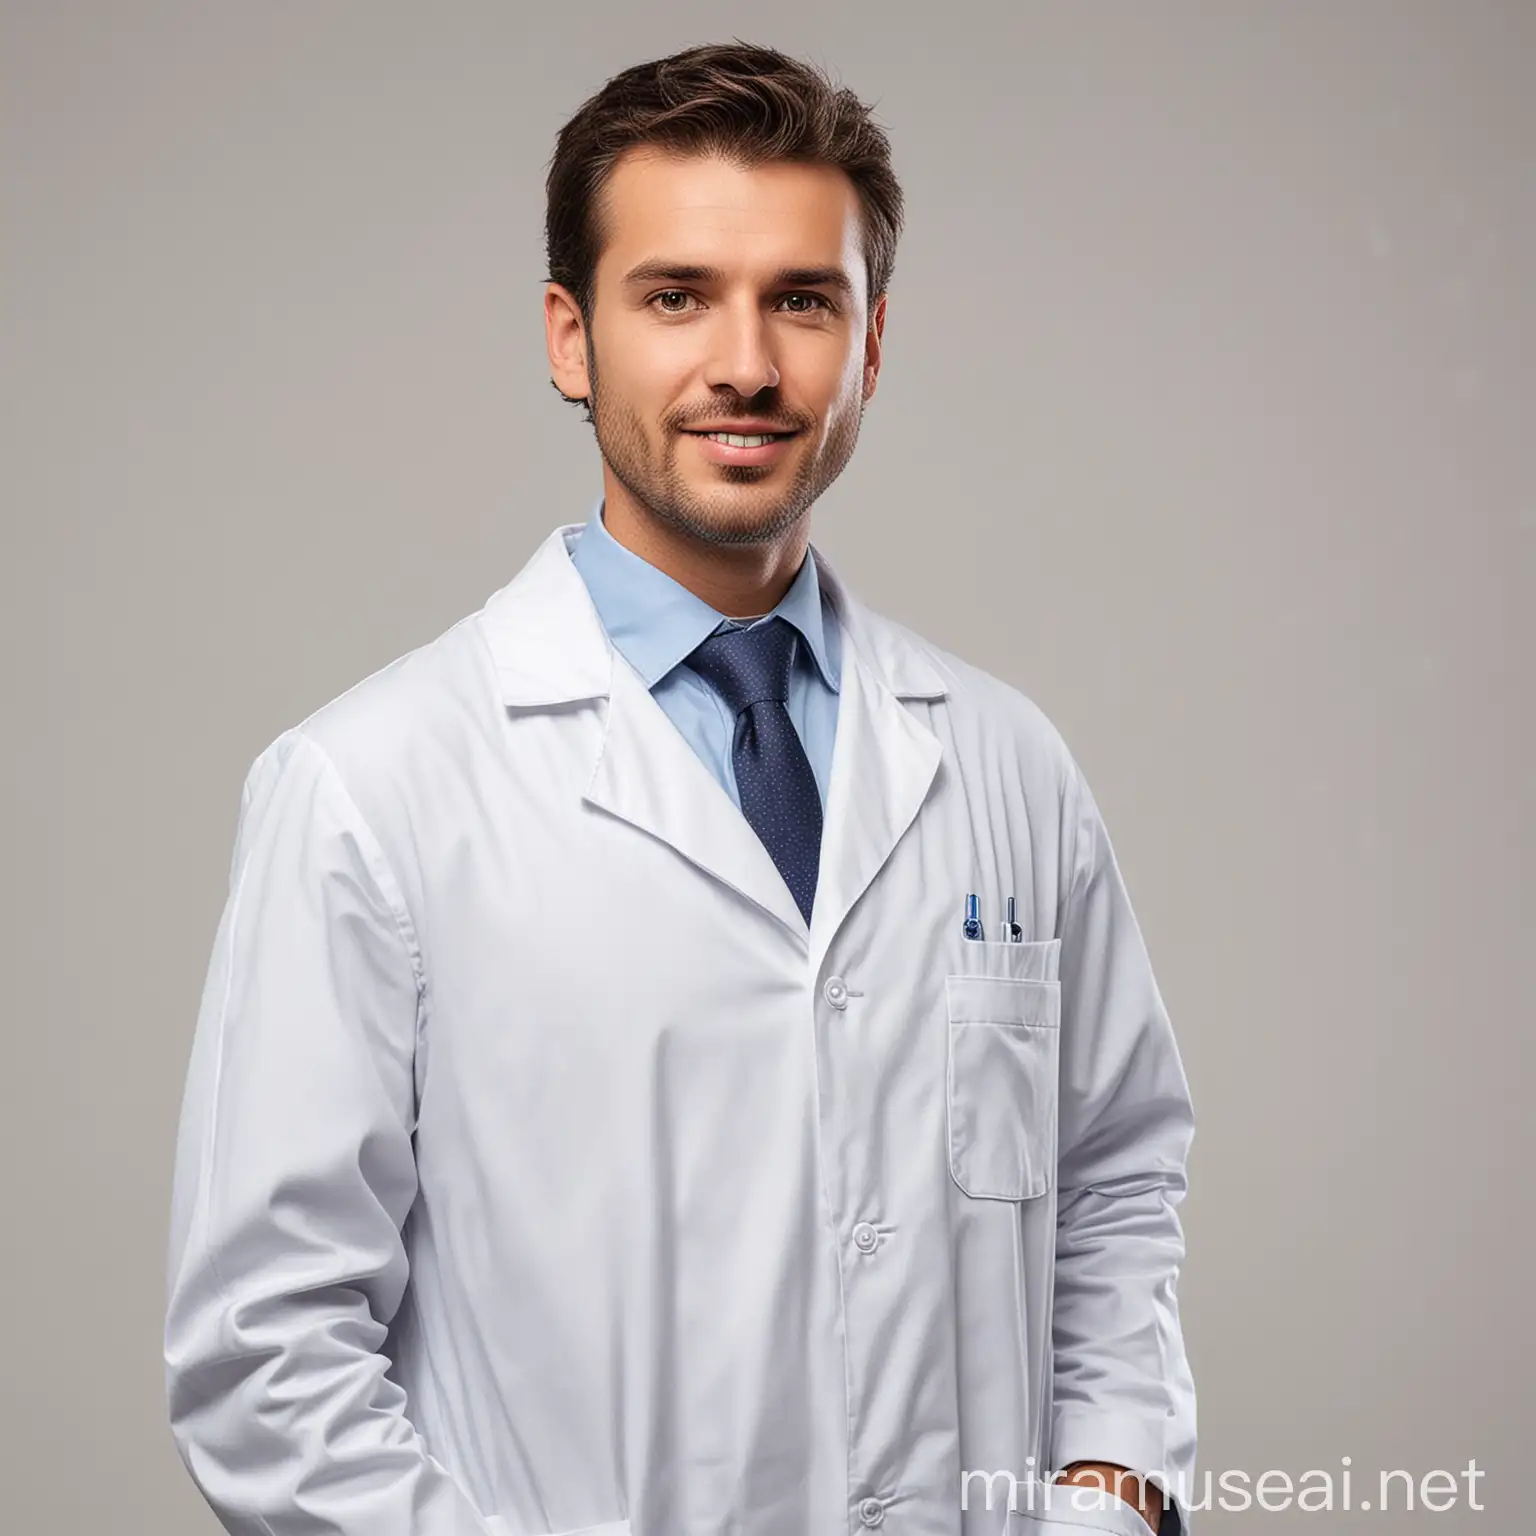 Nutrition Doctor man wearing a lab coat and also with white background
pure white please